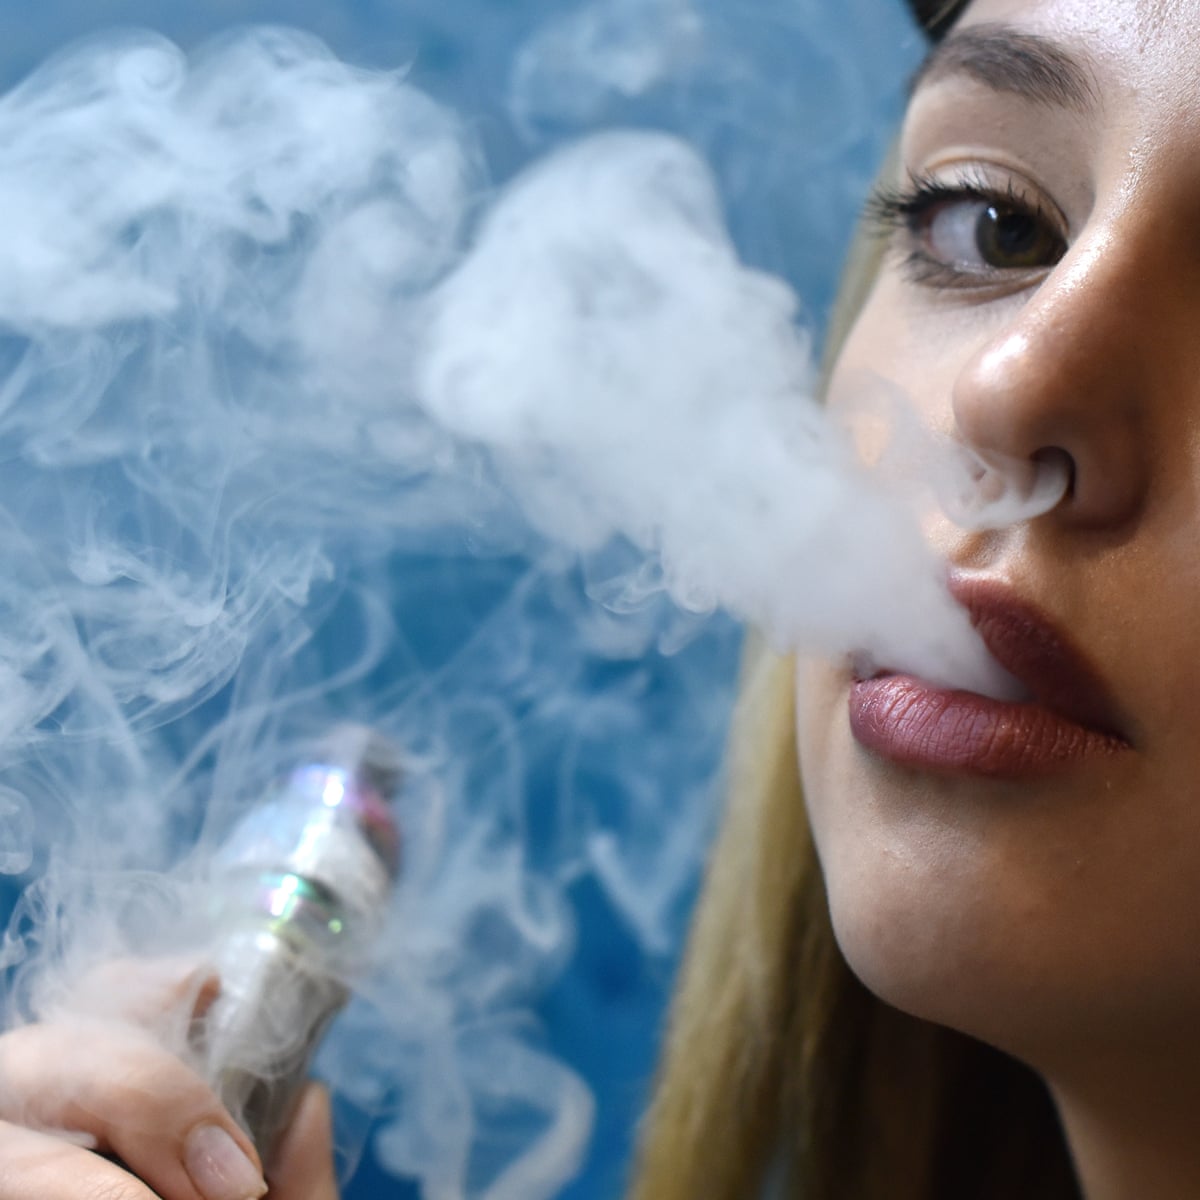 vride Blossom chauffør Child vaping risks becoming 'public health catastrophe' in UK, experts warn  | E-cigarettes | The Guardian